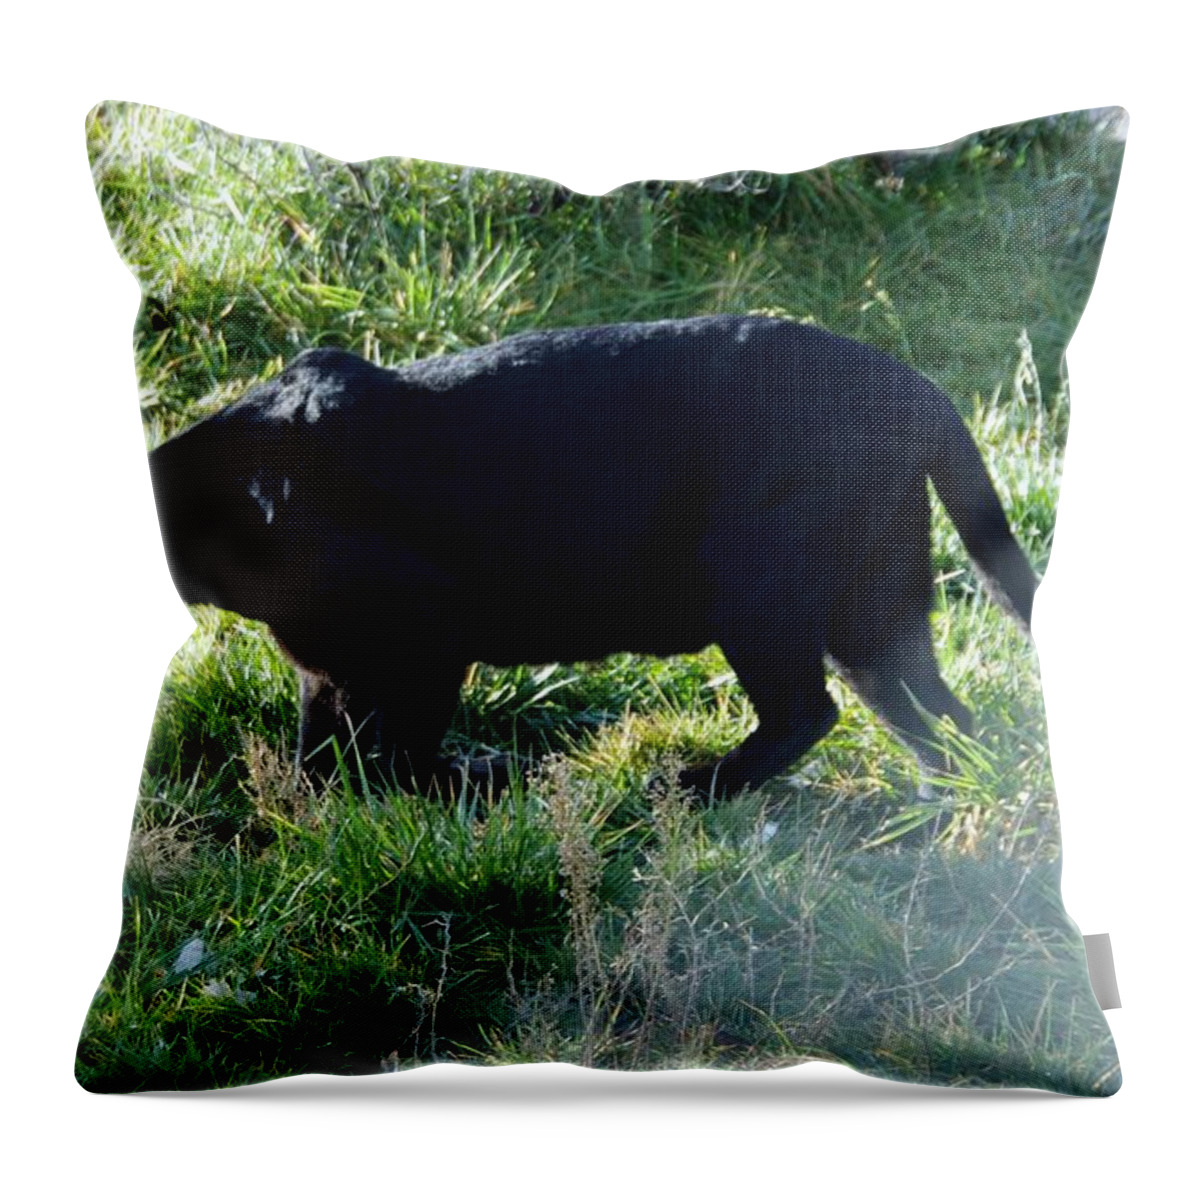 Out Of Africa Throw Pillow featuring the photograph Out of Africa Black Panther by Phyllis Spoor